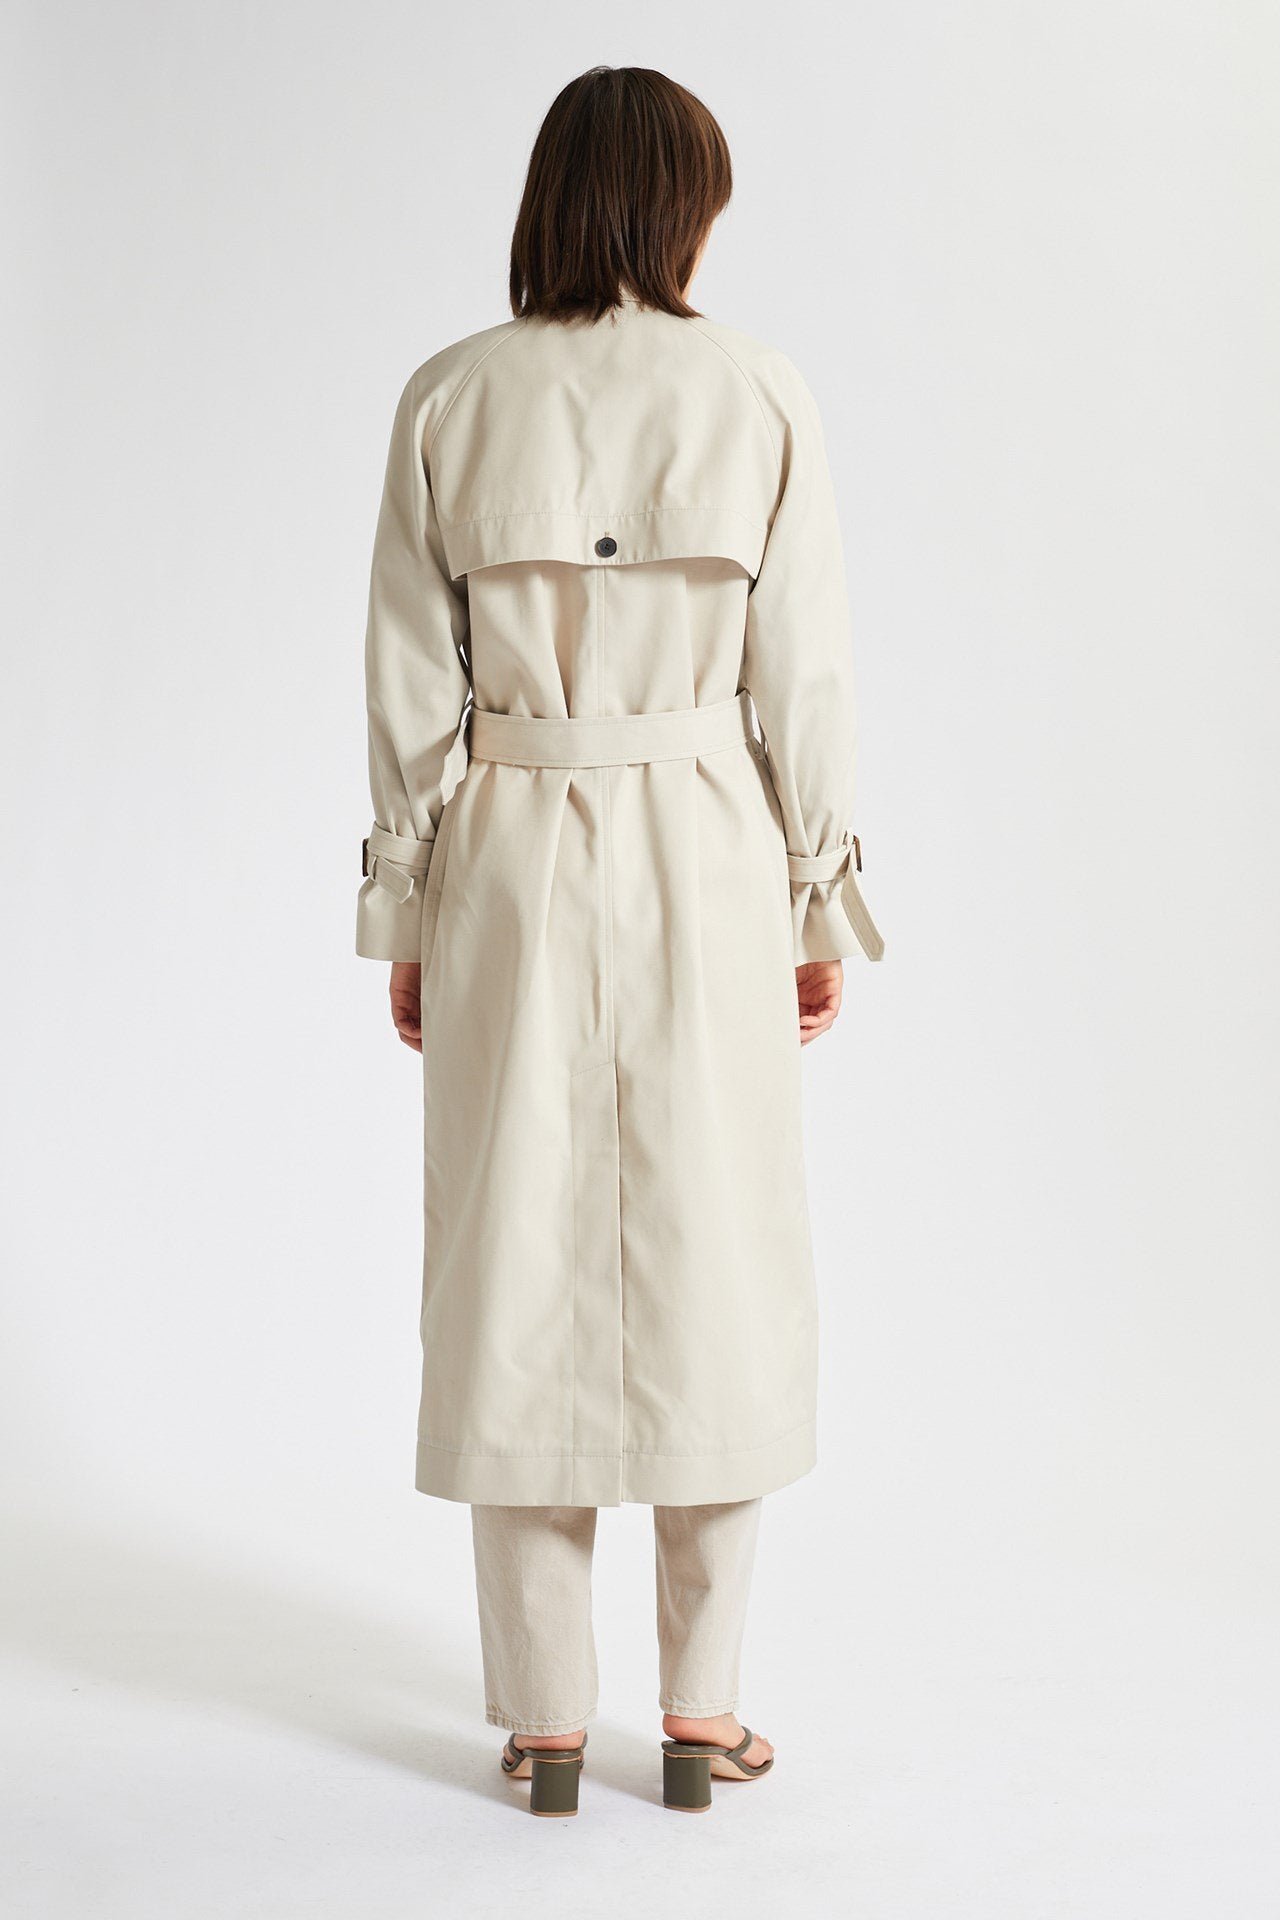 Sara tech twill trench coat in light sand by Wood Wood